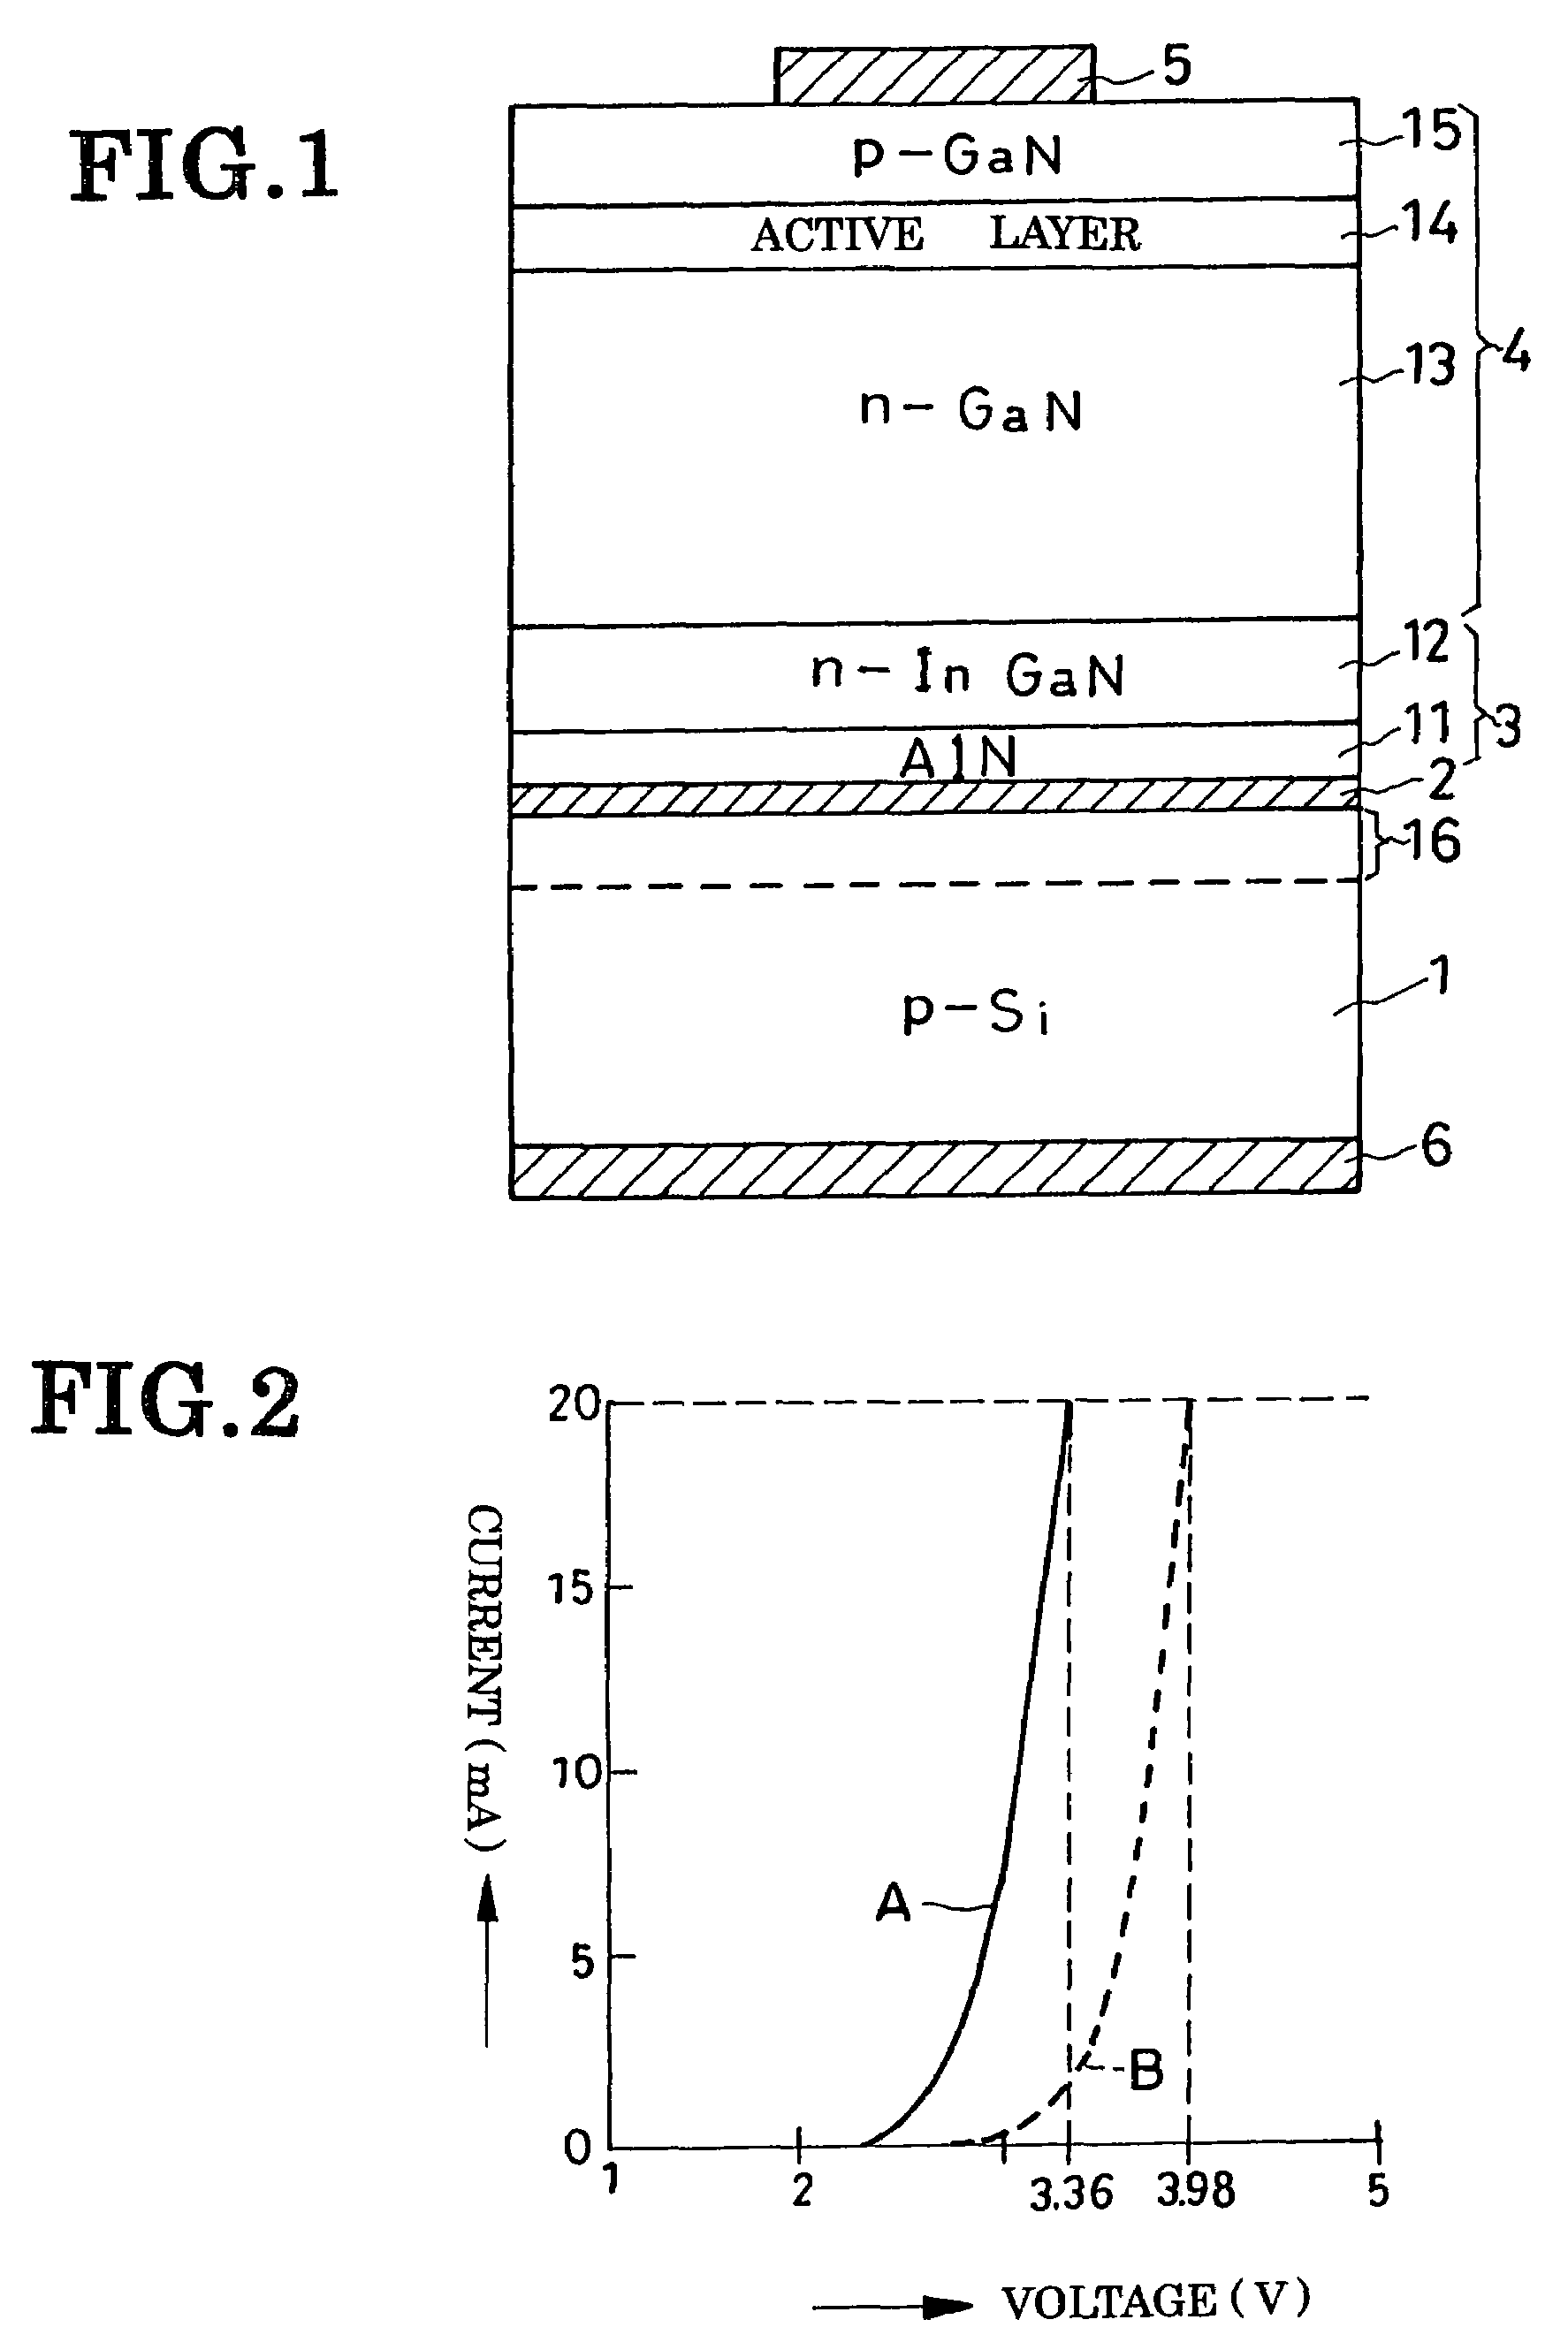 Nitride-based semiconductor device